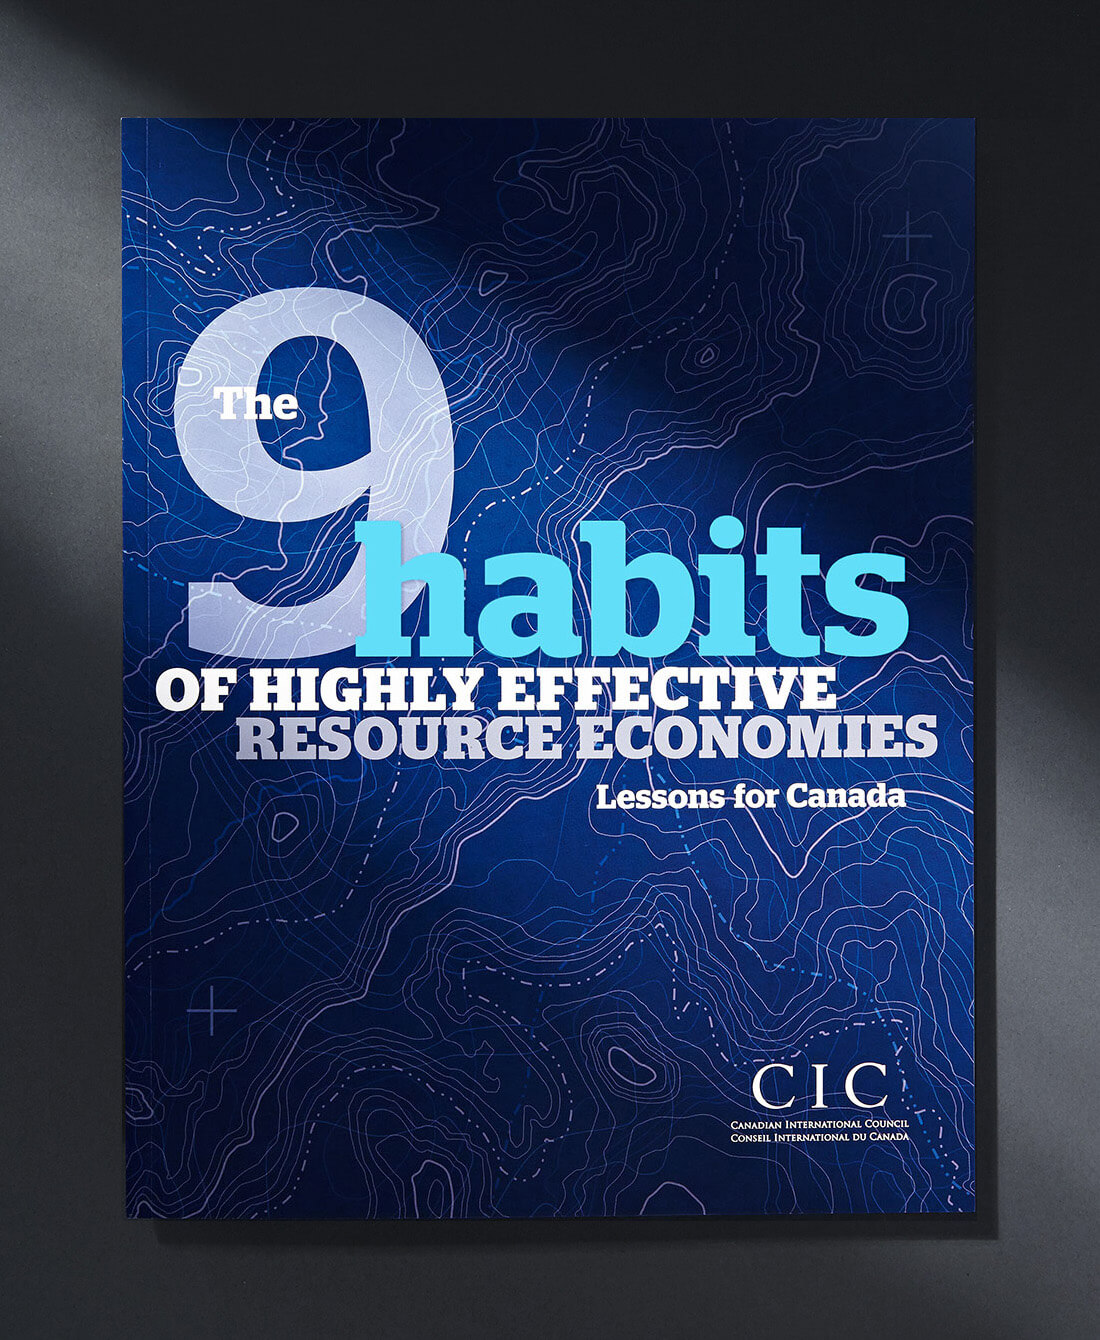 CIC-9-Habits-Cover4